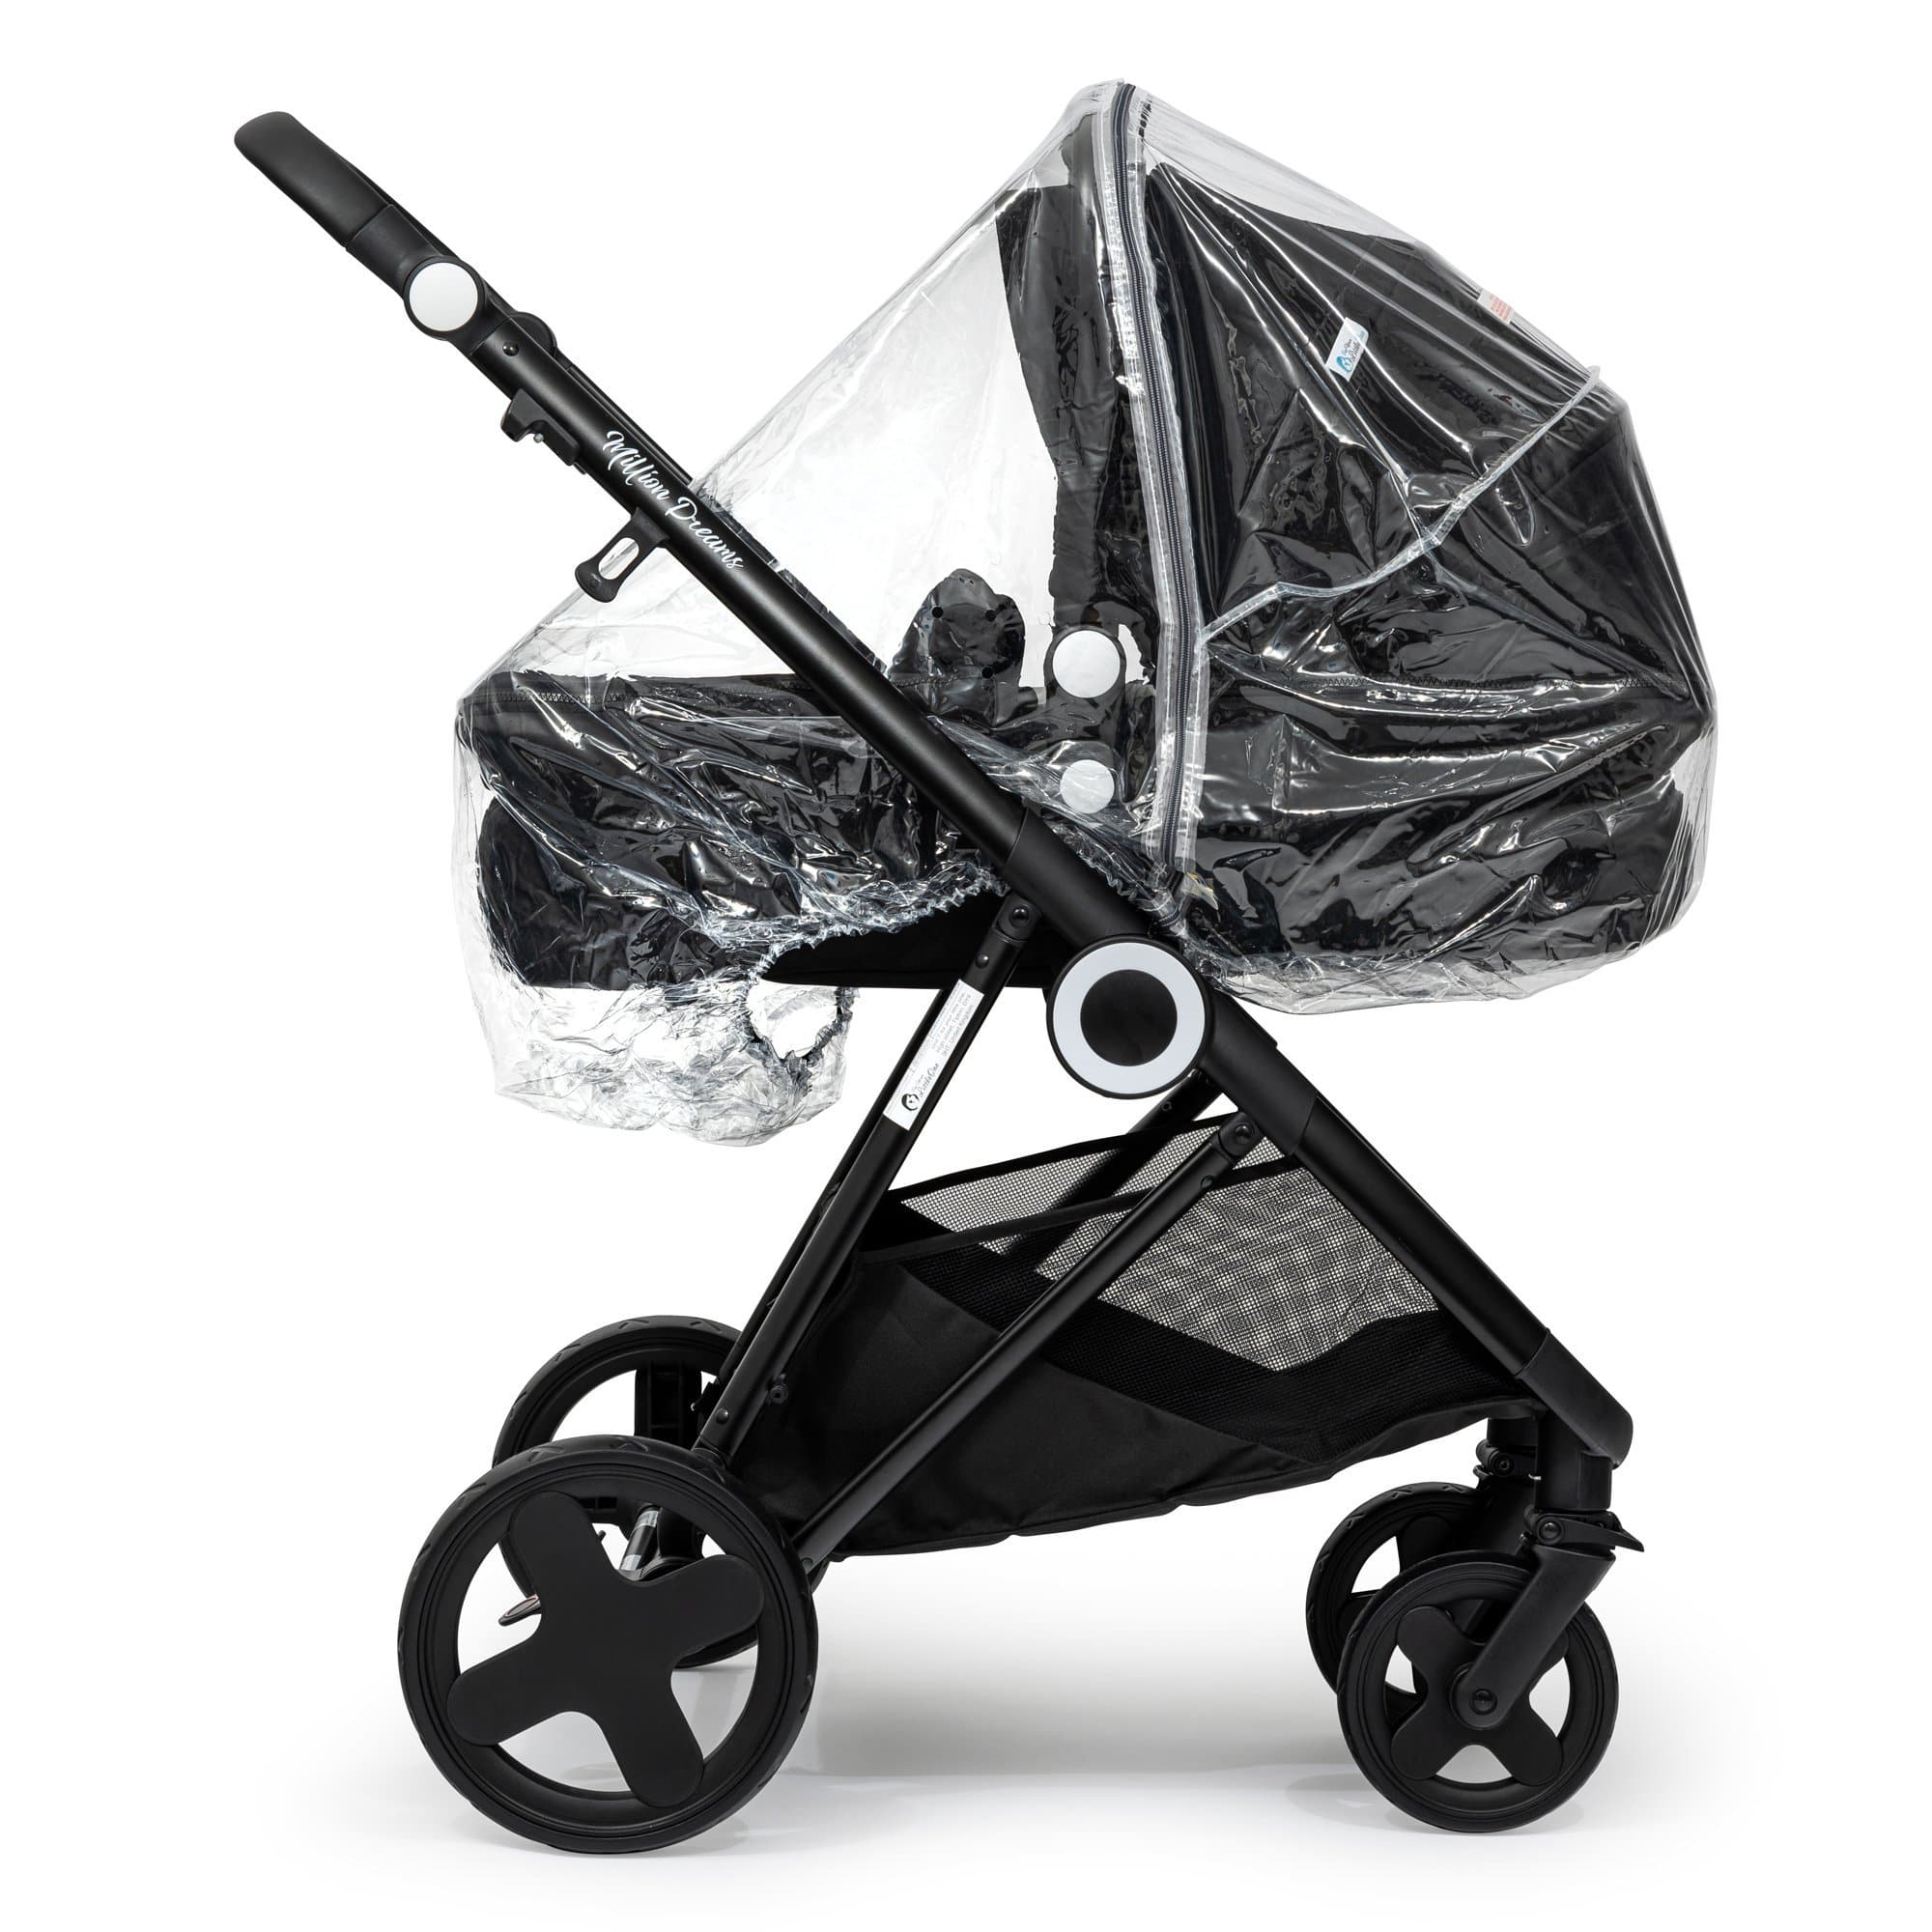 2 in 1 Rain Cover Compatible with Mee-Go - Fits All Models - For Your Little One